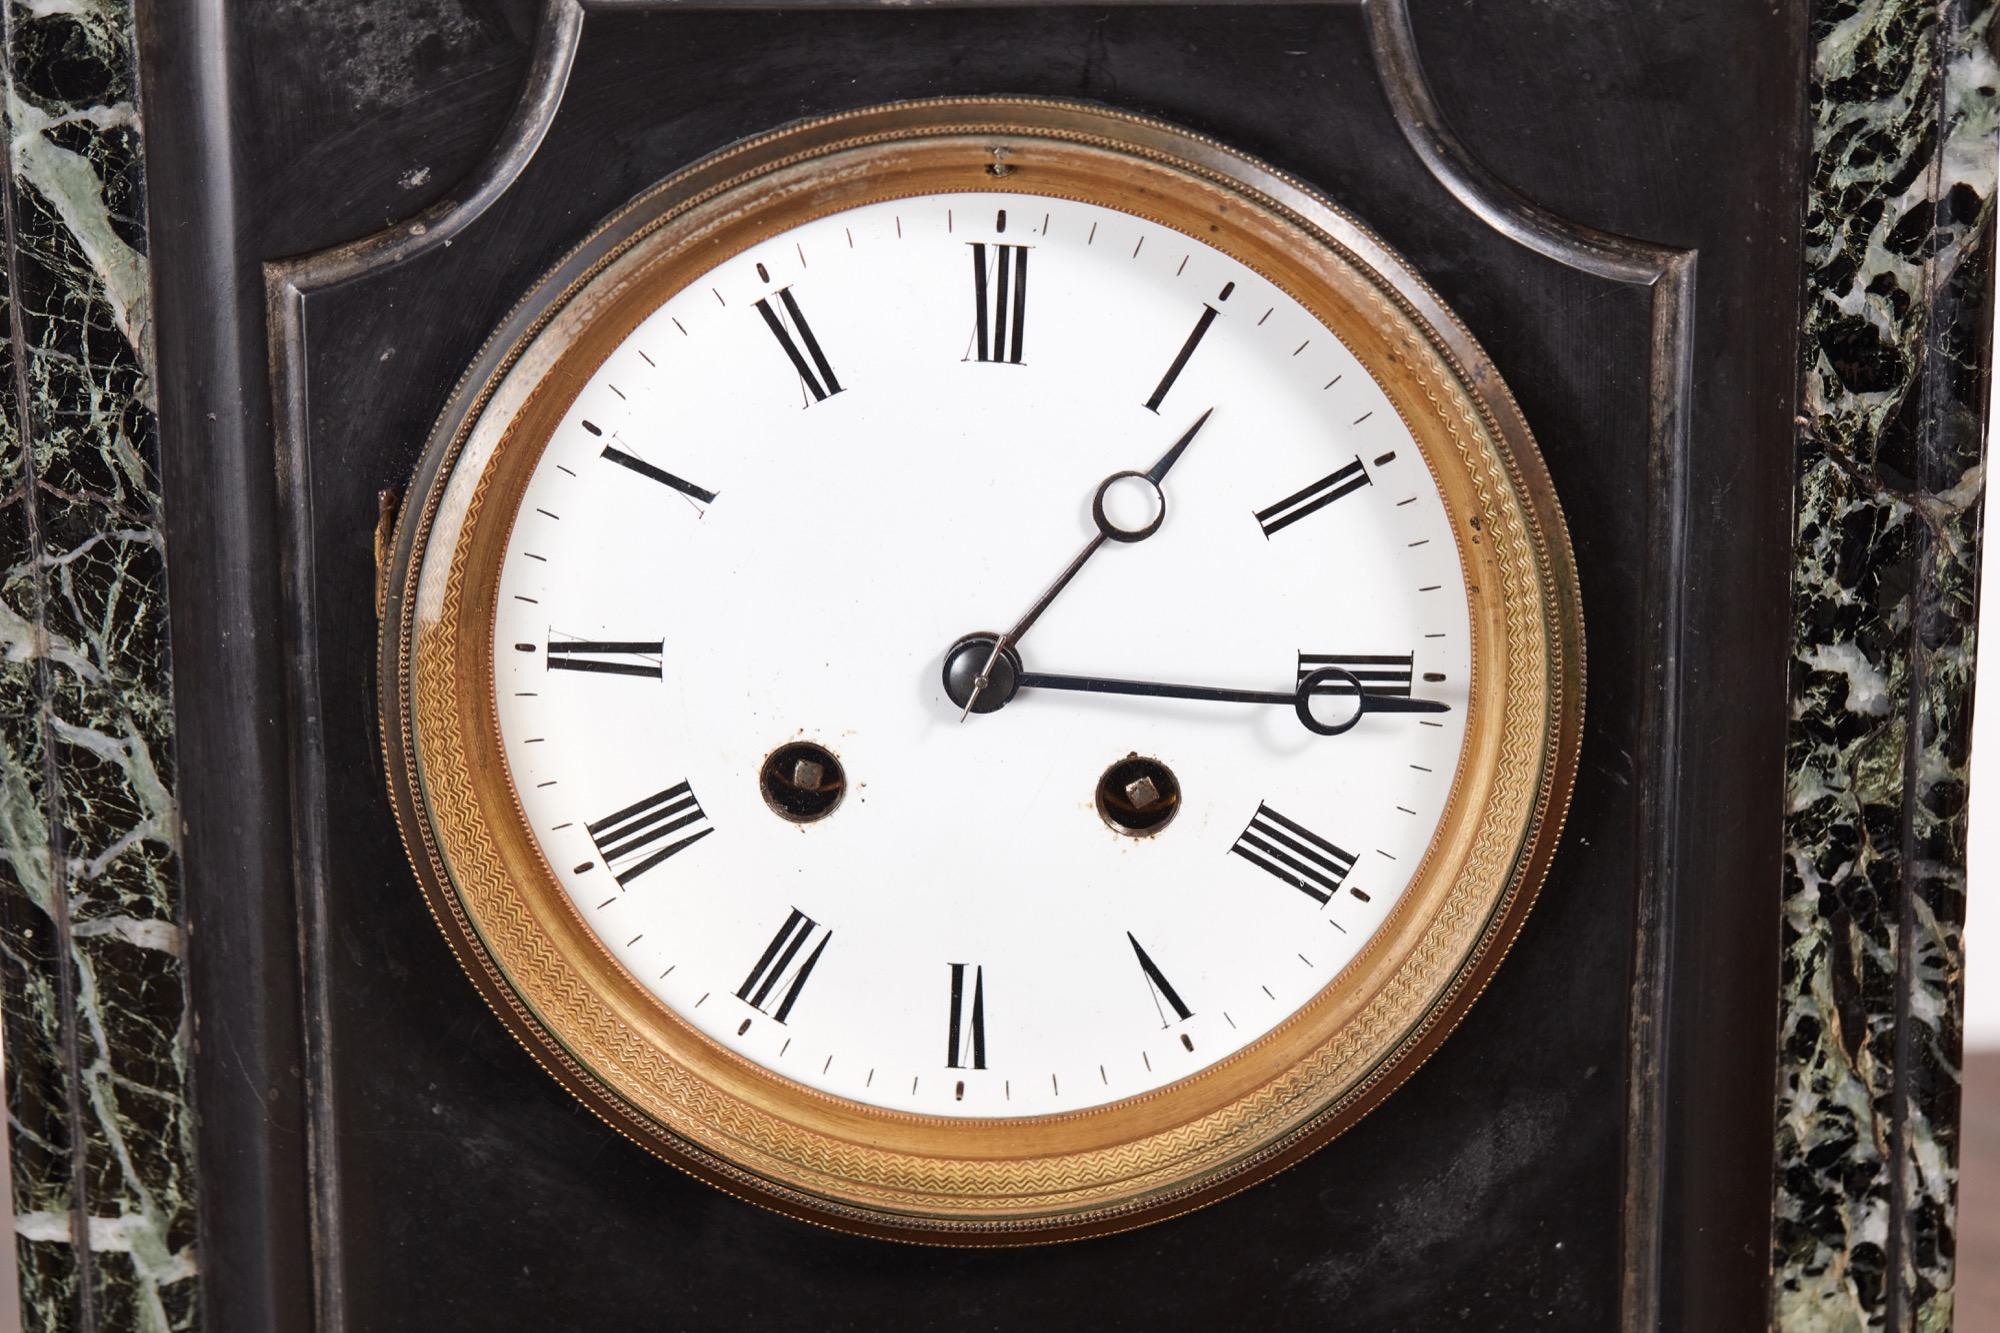 Victorian black marble mantel clock, with a white enamel dial, eight day French movement which strikes the hour and half hour on a bell, good working order
Original key
Measures: 11